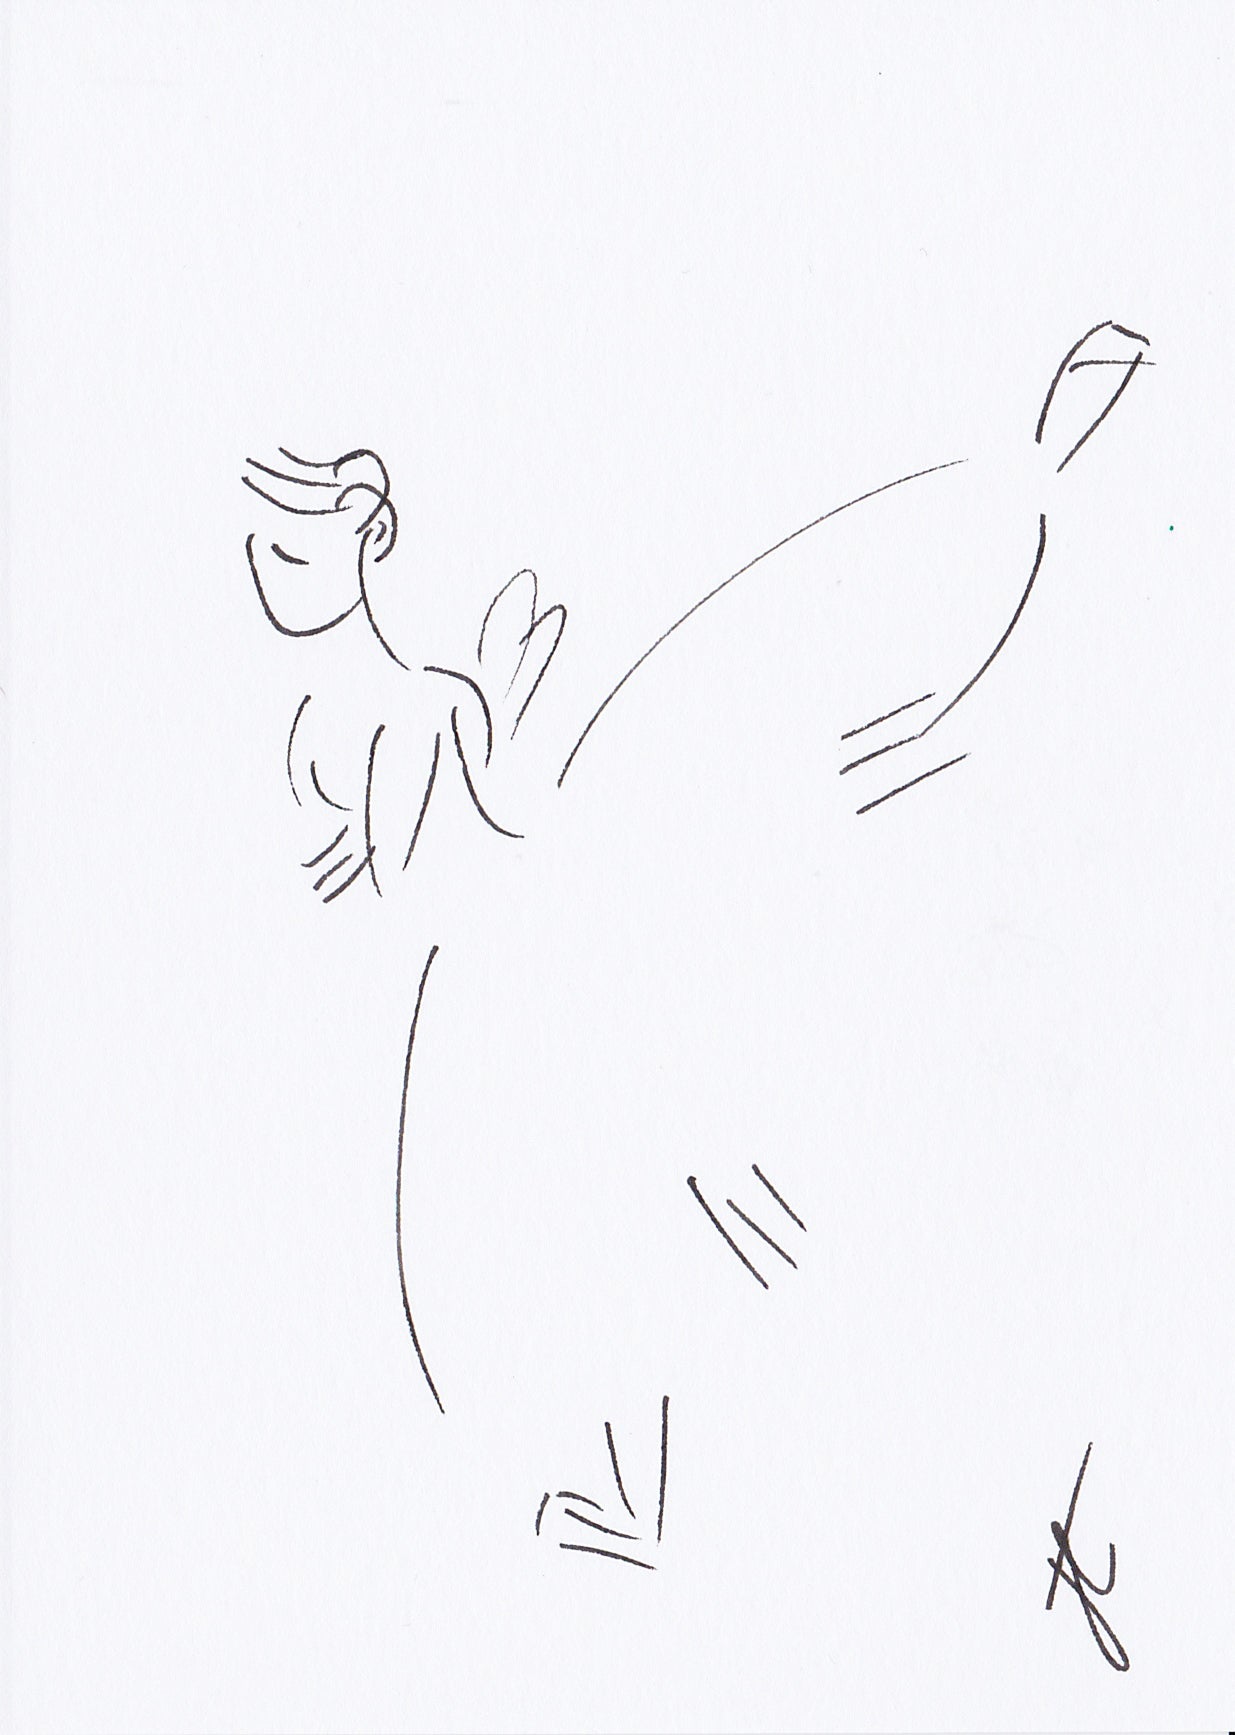 Ballerina sketch with minimal lines to evoke Giselle figure in penché